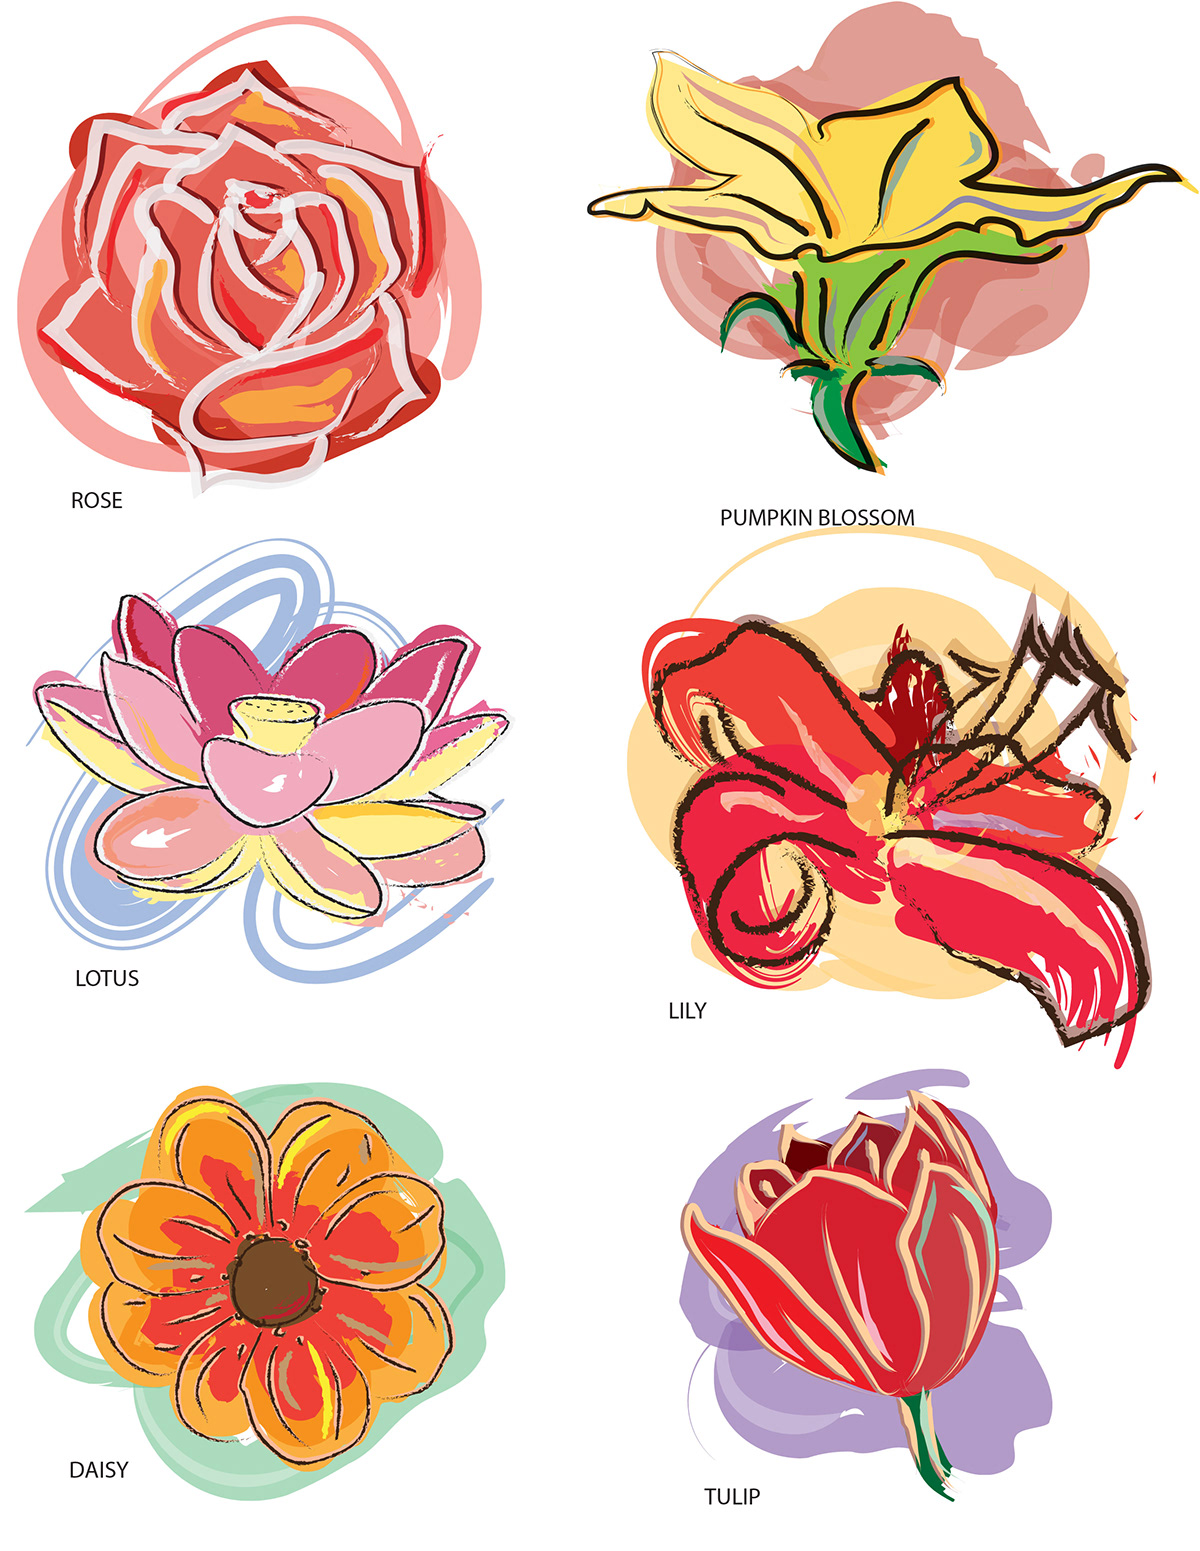 rose flower pumkin blossom lily daisy loose color Lotus Flowers soft paintbrush